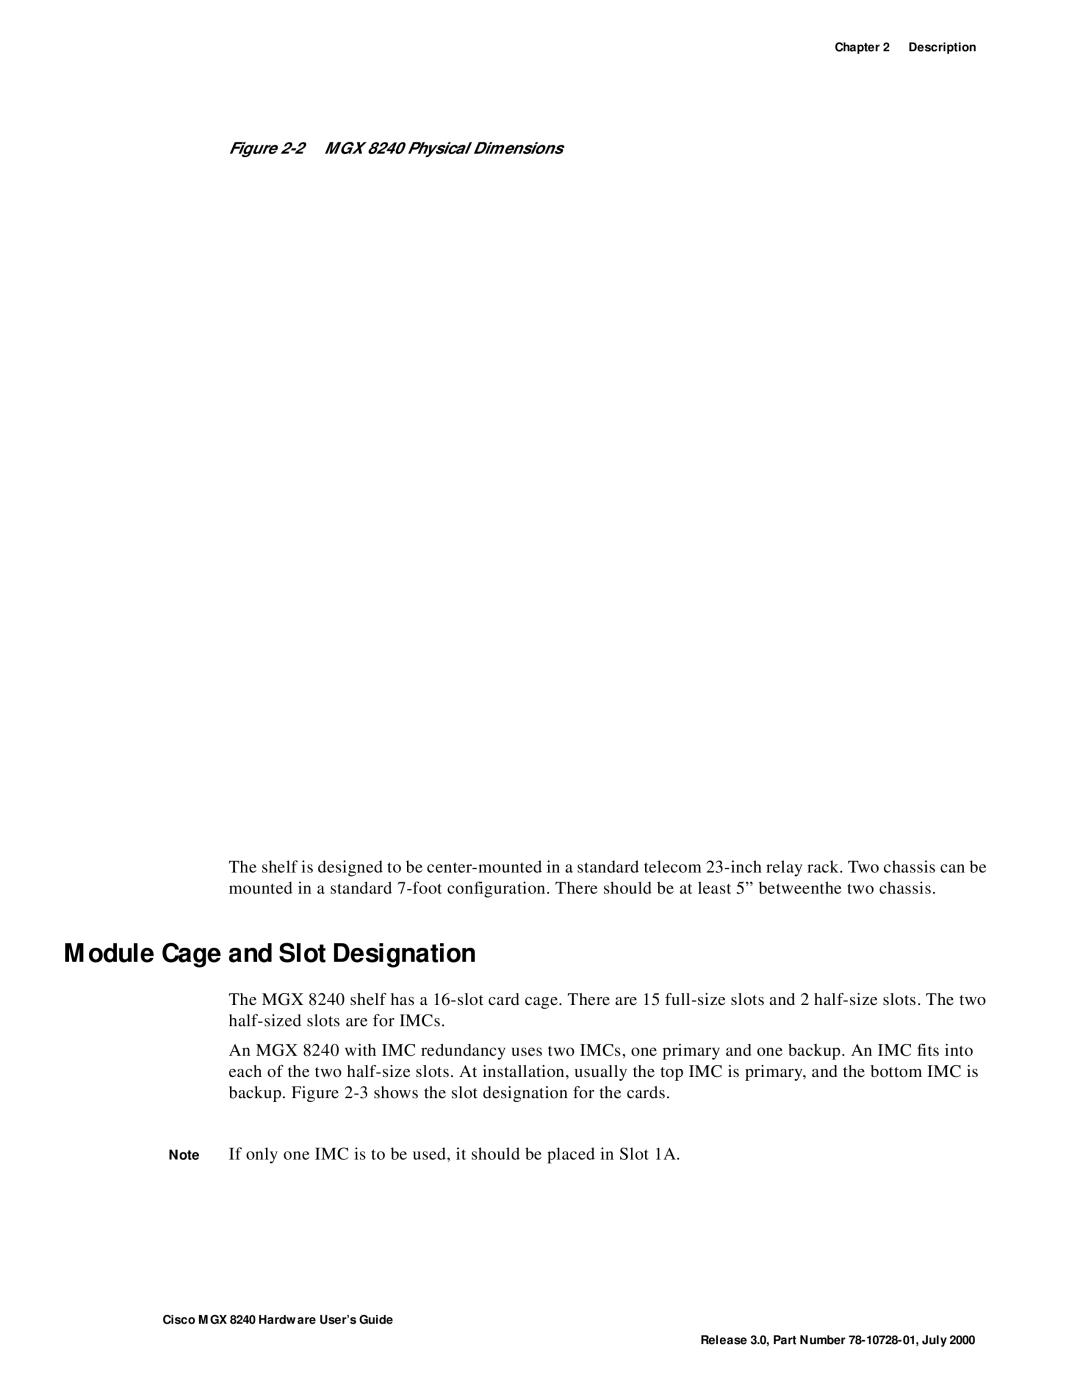 Cisco Systems MGX 8240 manual Module Cage and Slot Designation 